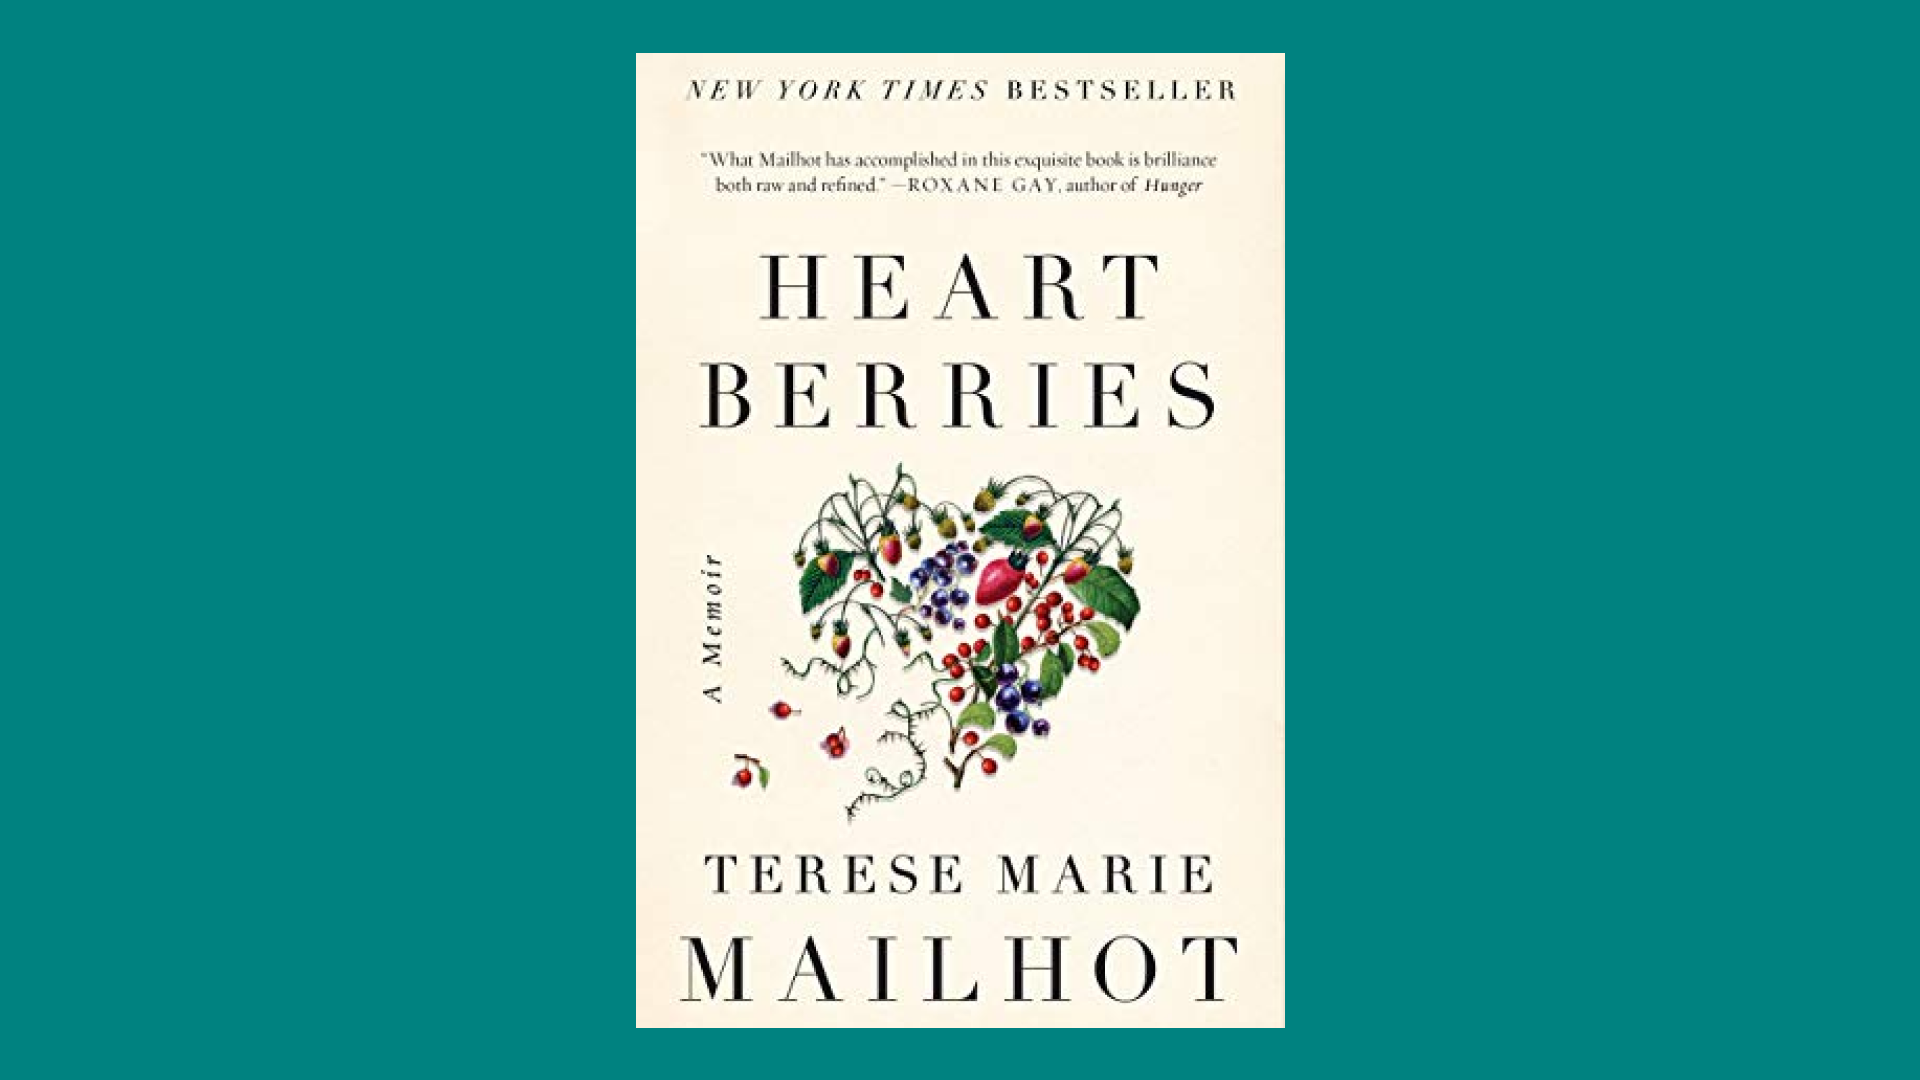  "Heart Berries" by Terese Marie Mailhot